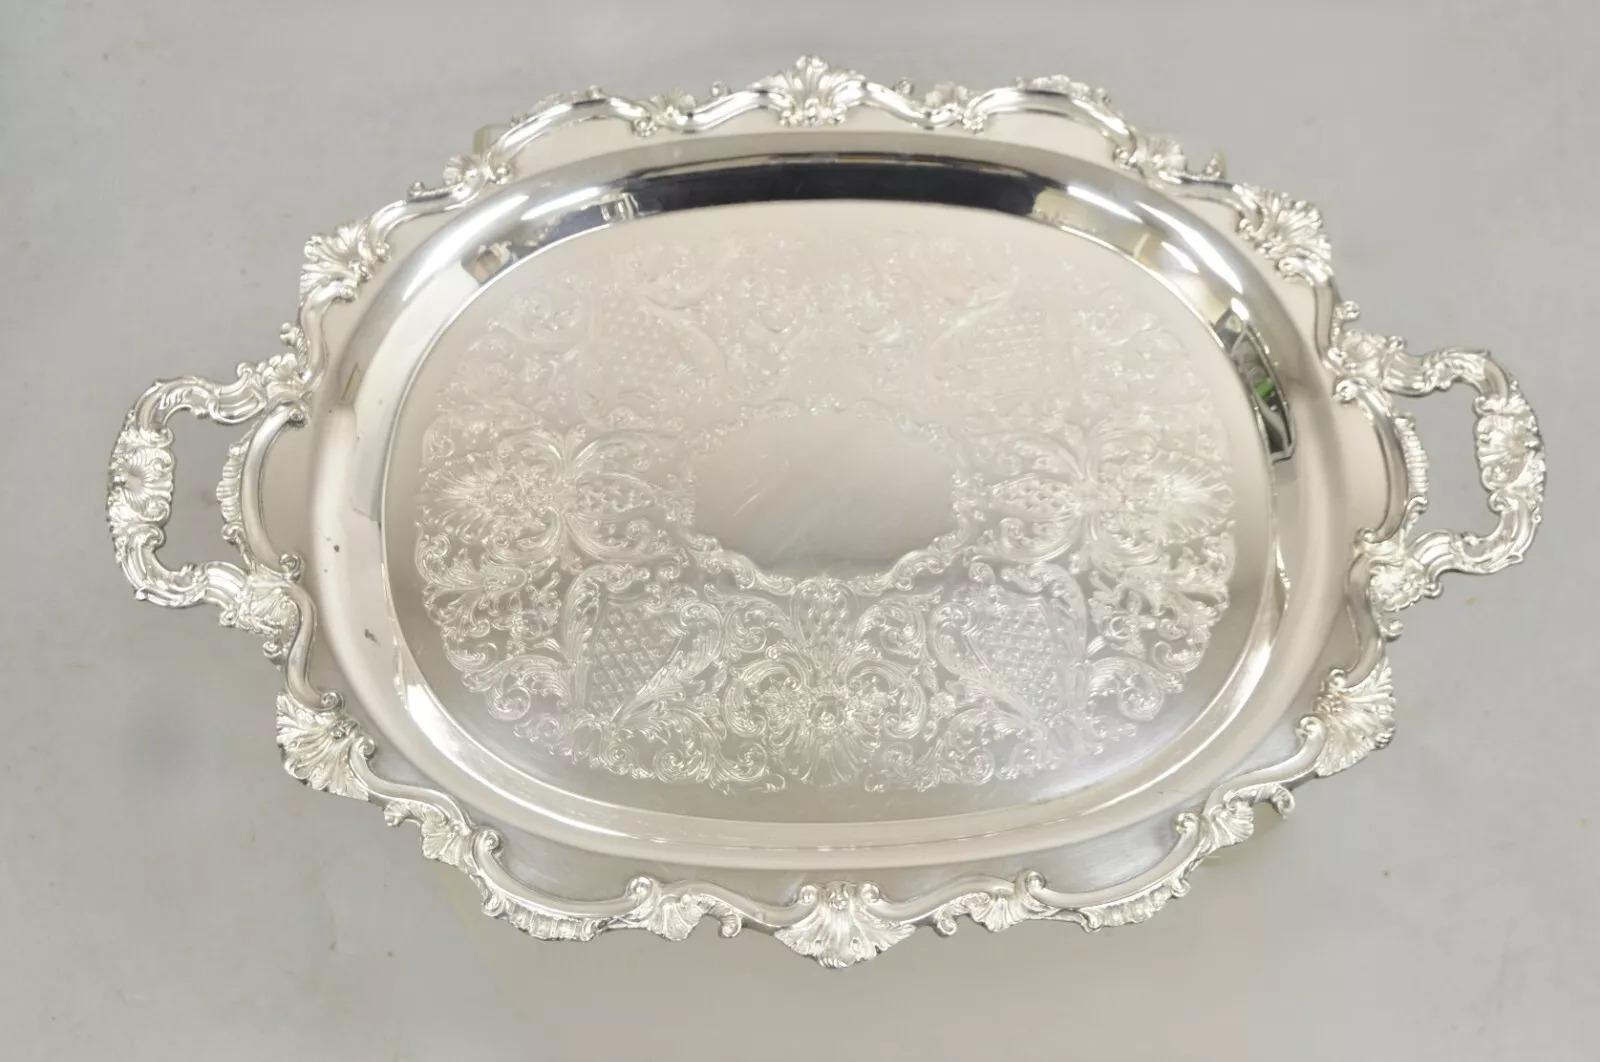 Vintage EPCA Bristol Silverplate by Poole 145 Silver Plated Victorian Style Serving Tray. Circa Mid 20th Century. Measurements: 3